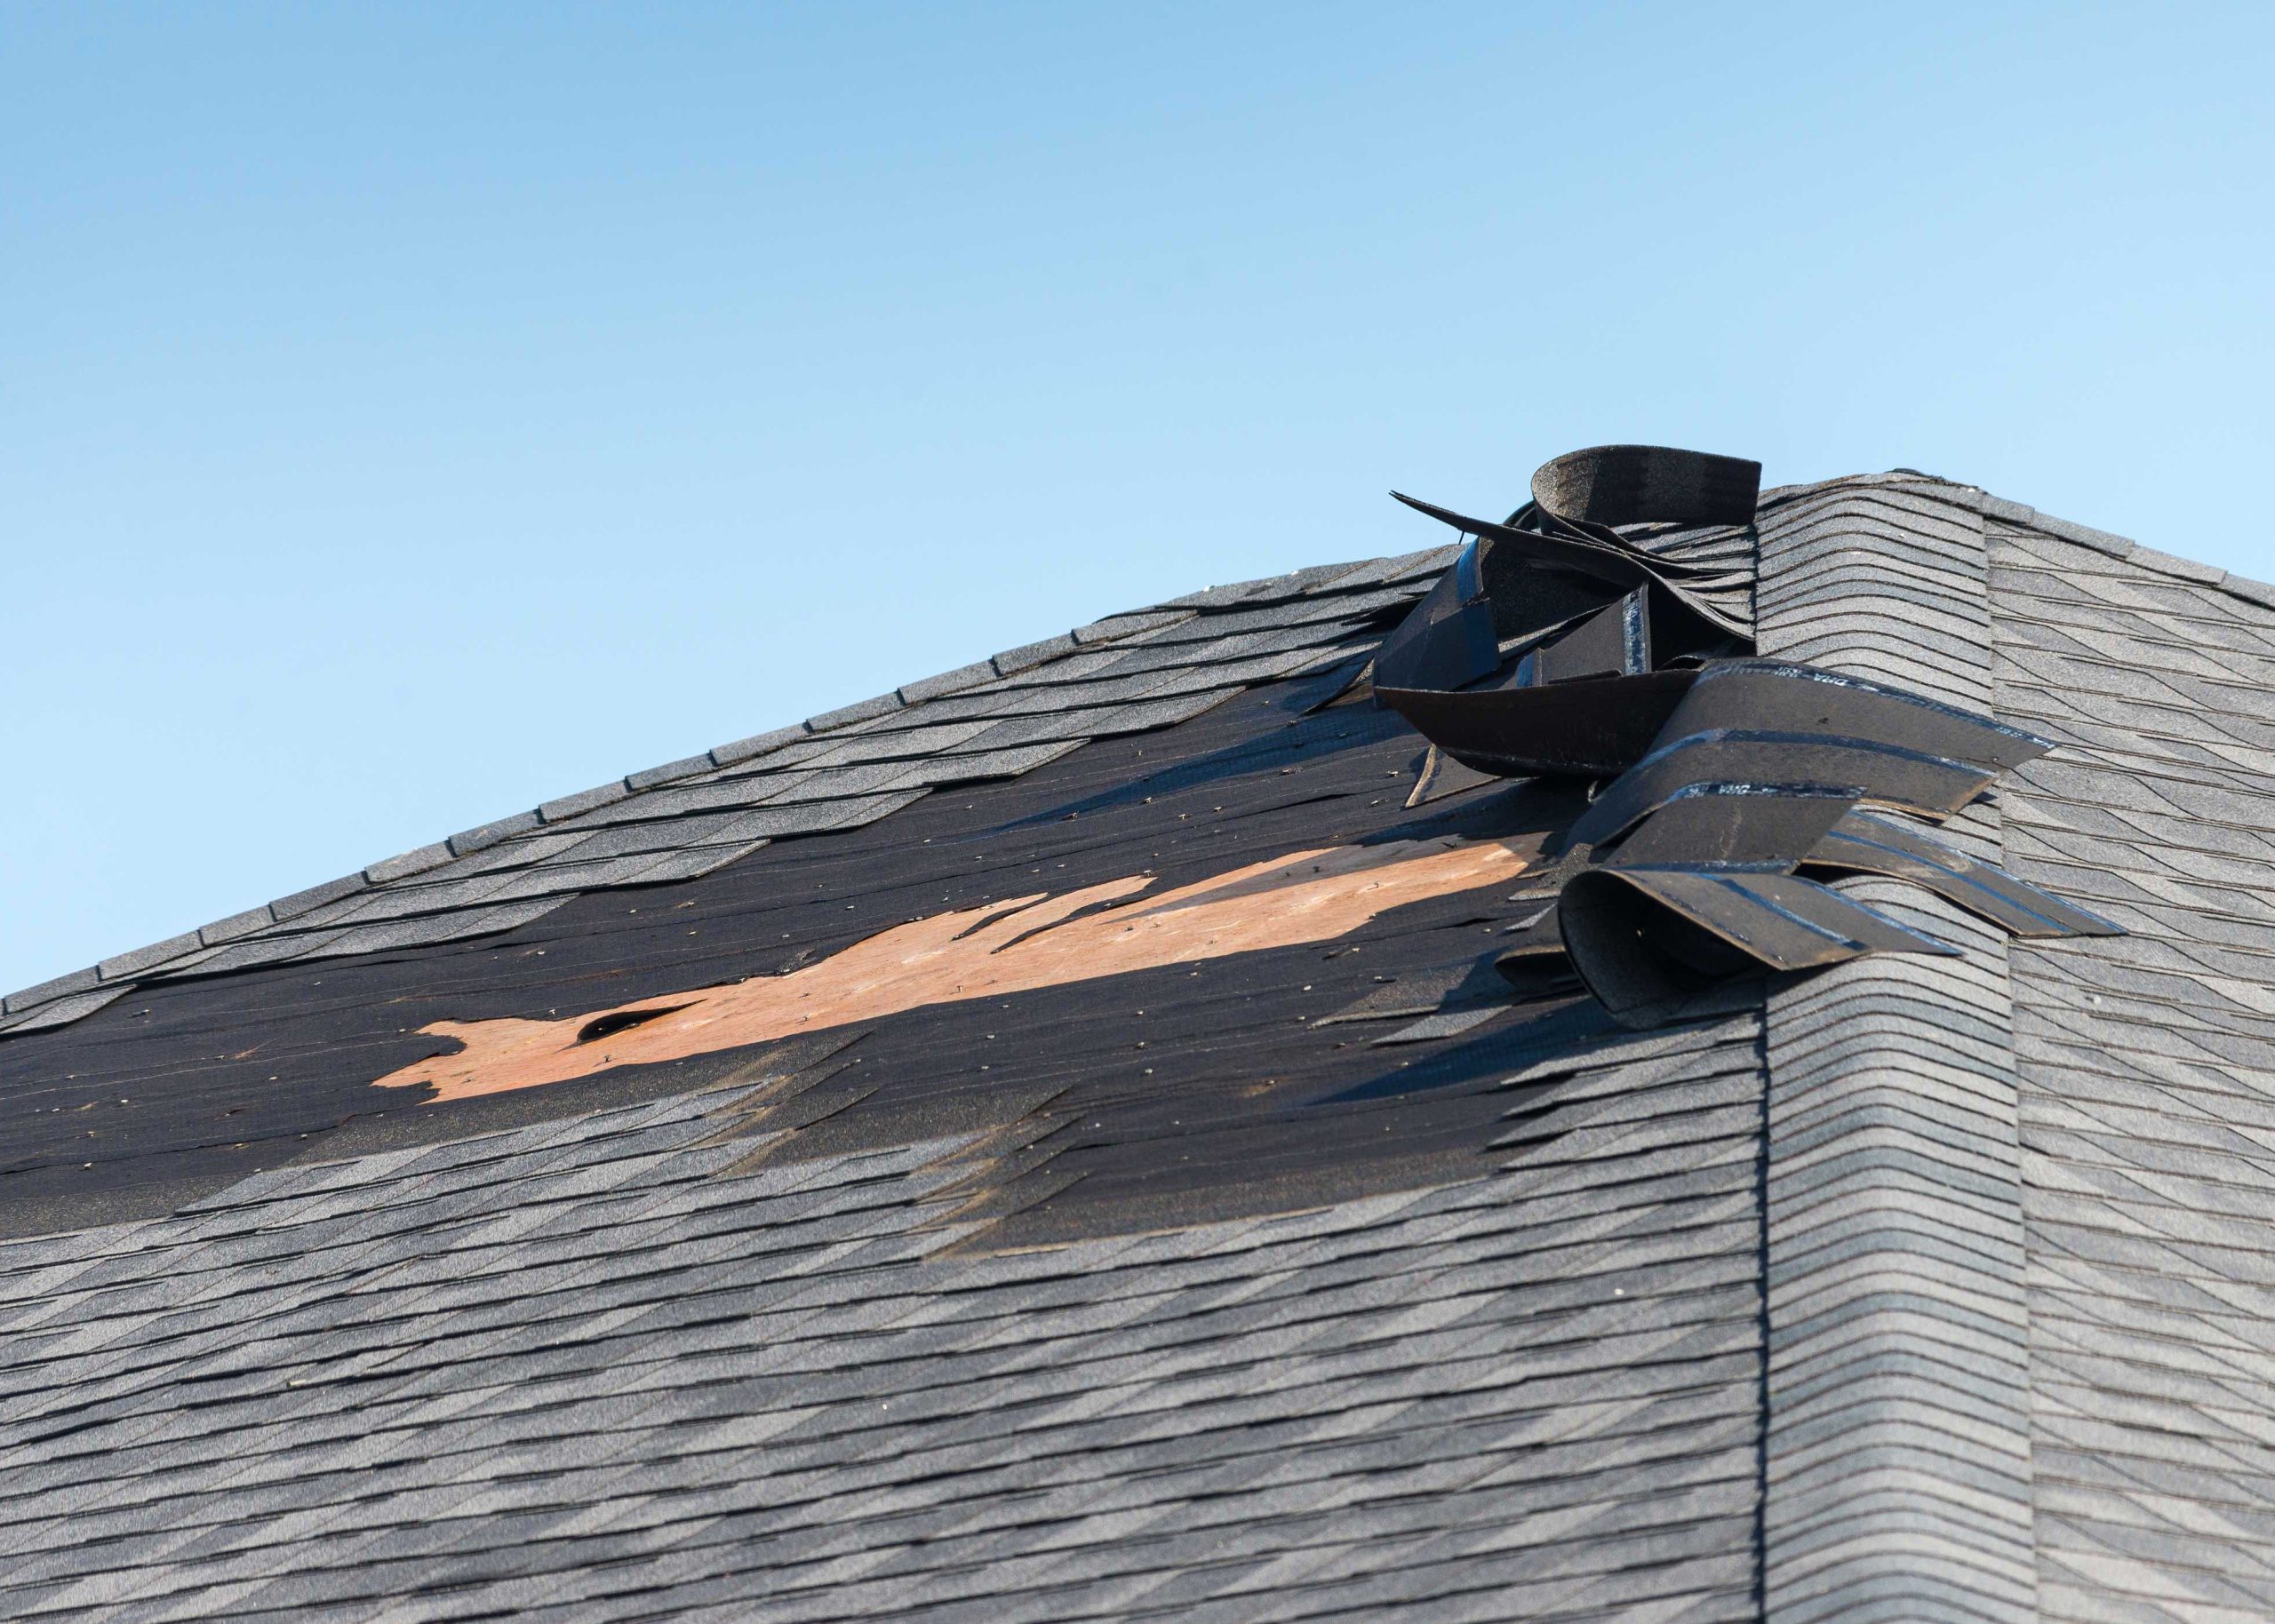 Damage on a roof that a roof repair expert can fix.